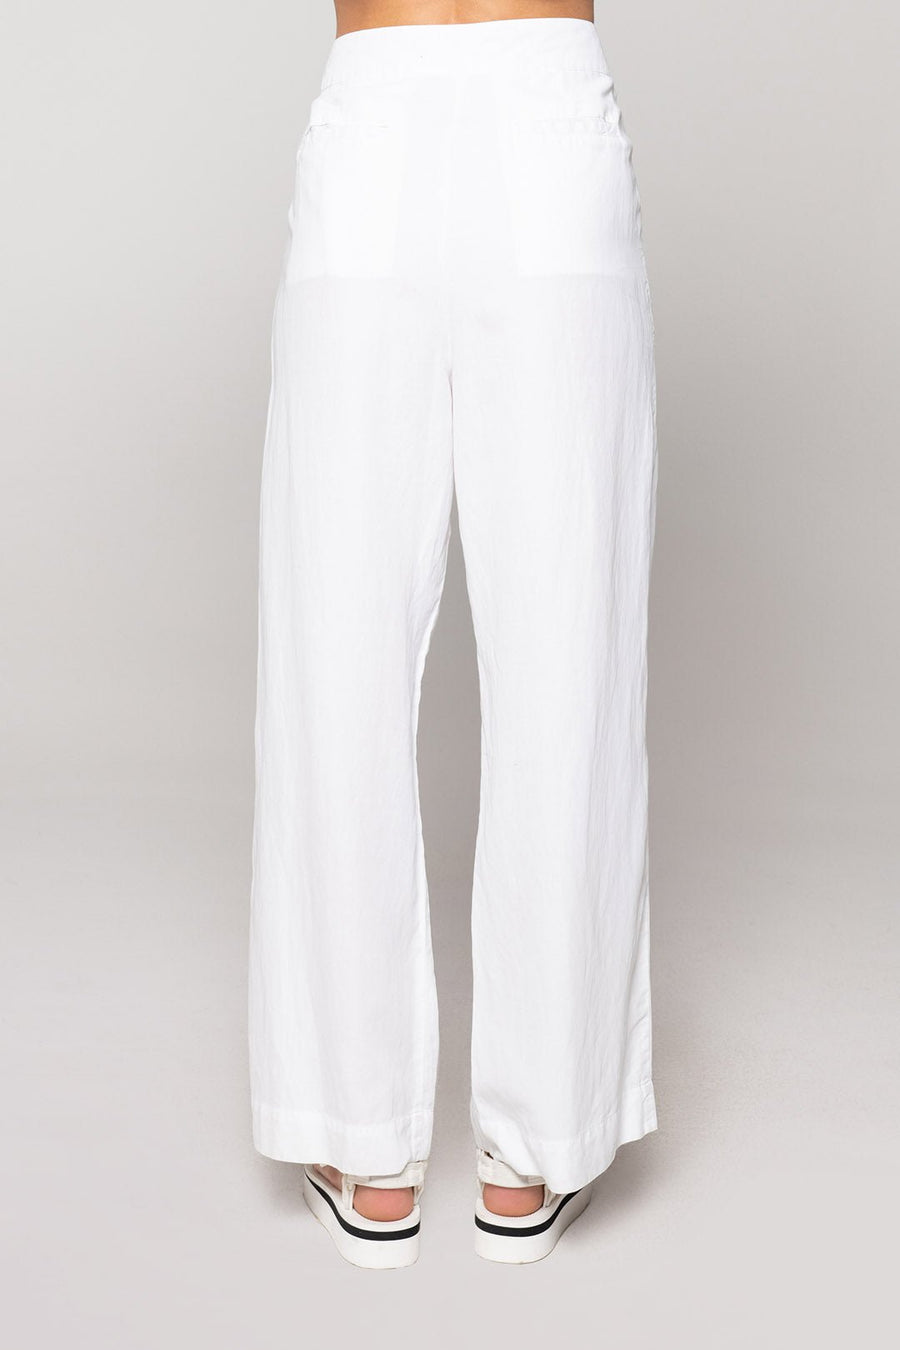 LINCOLN SAILOR PANT, WHITE - Burning Torch Online Boutique